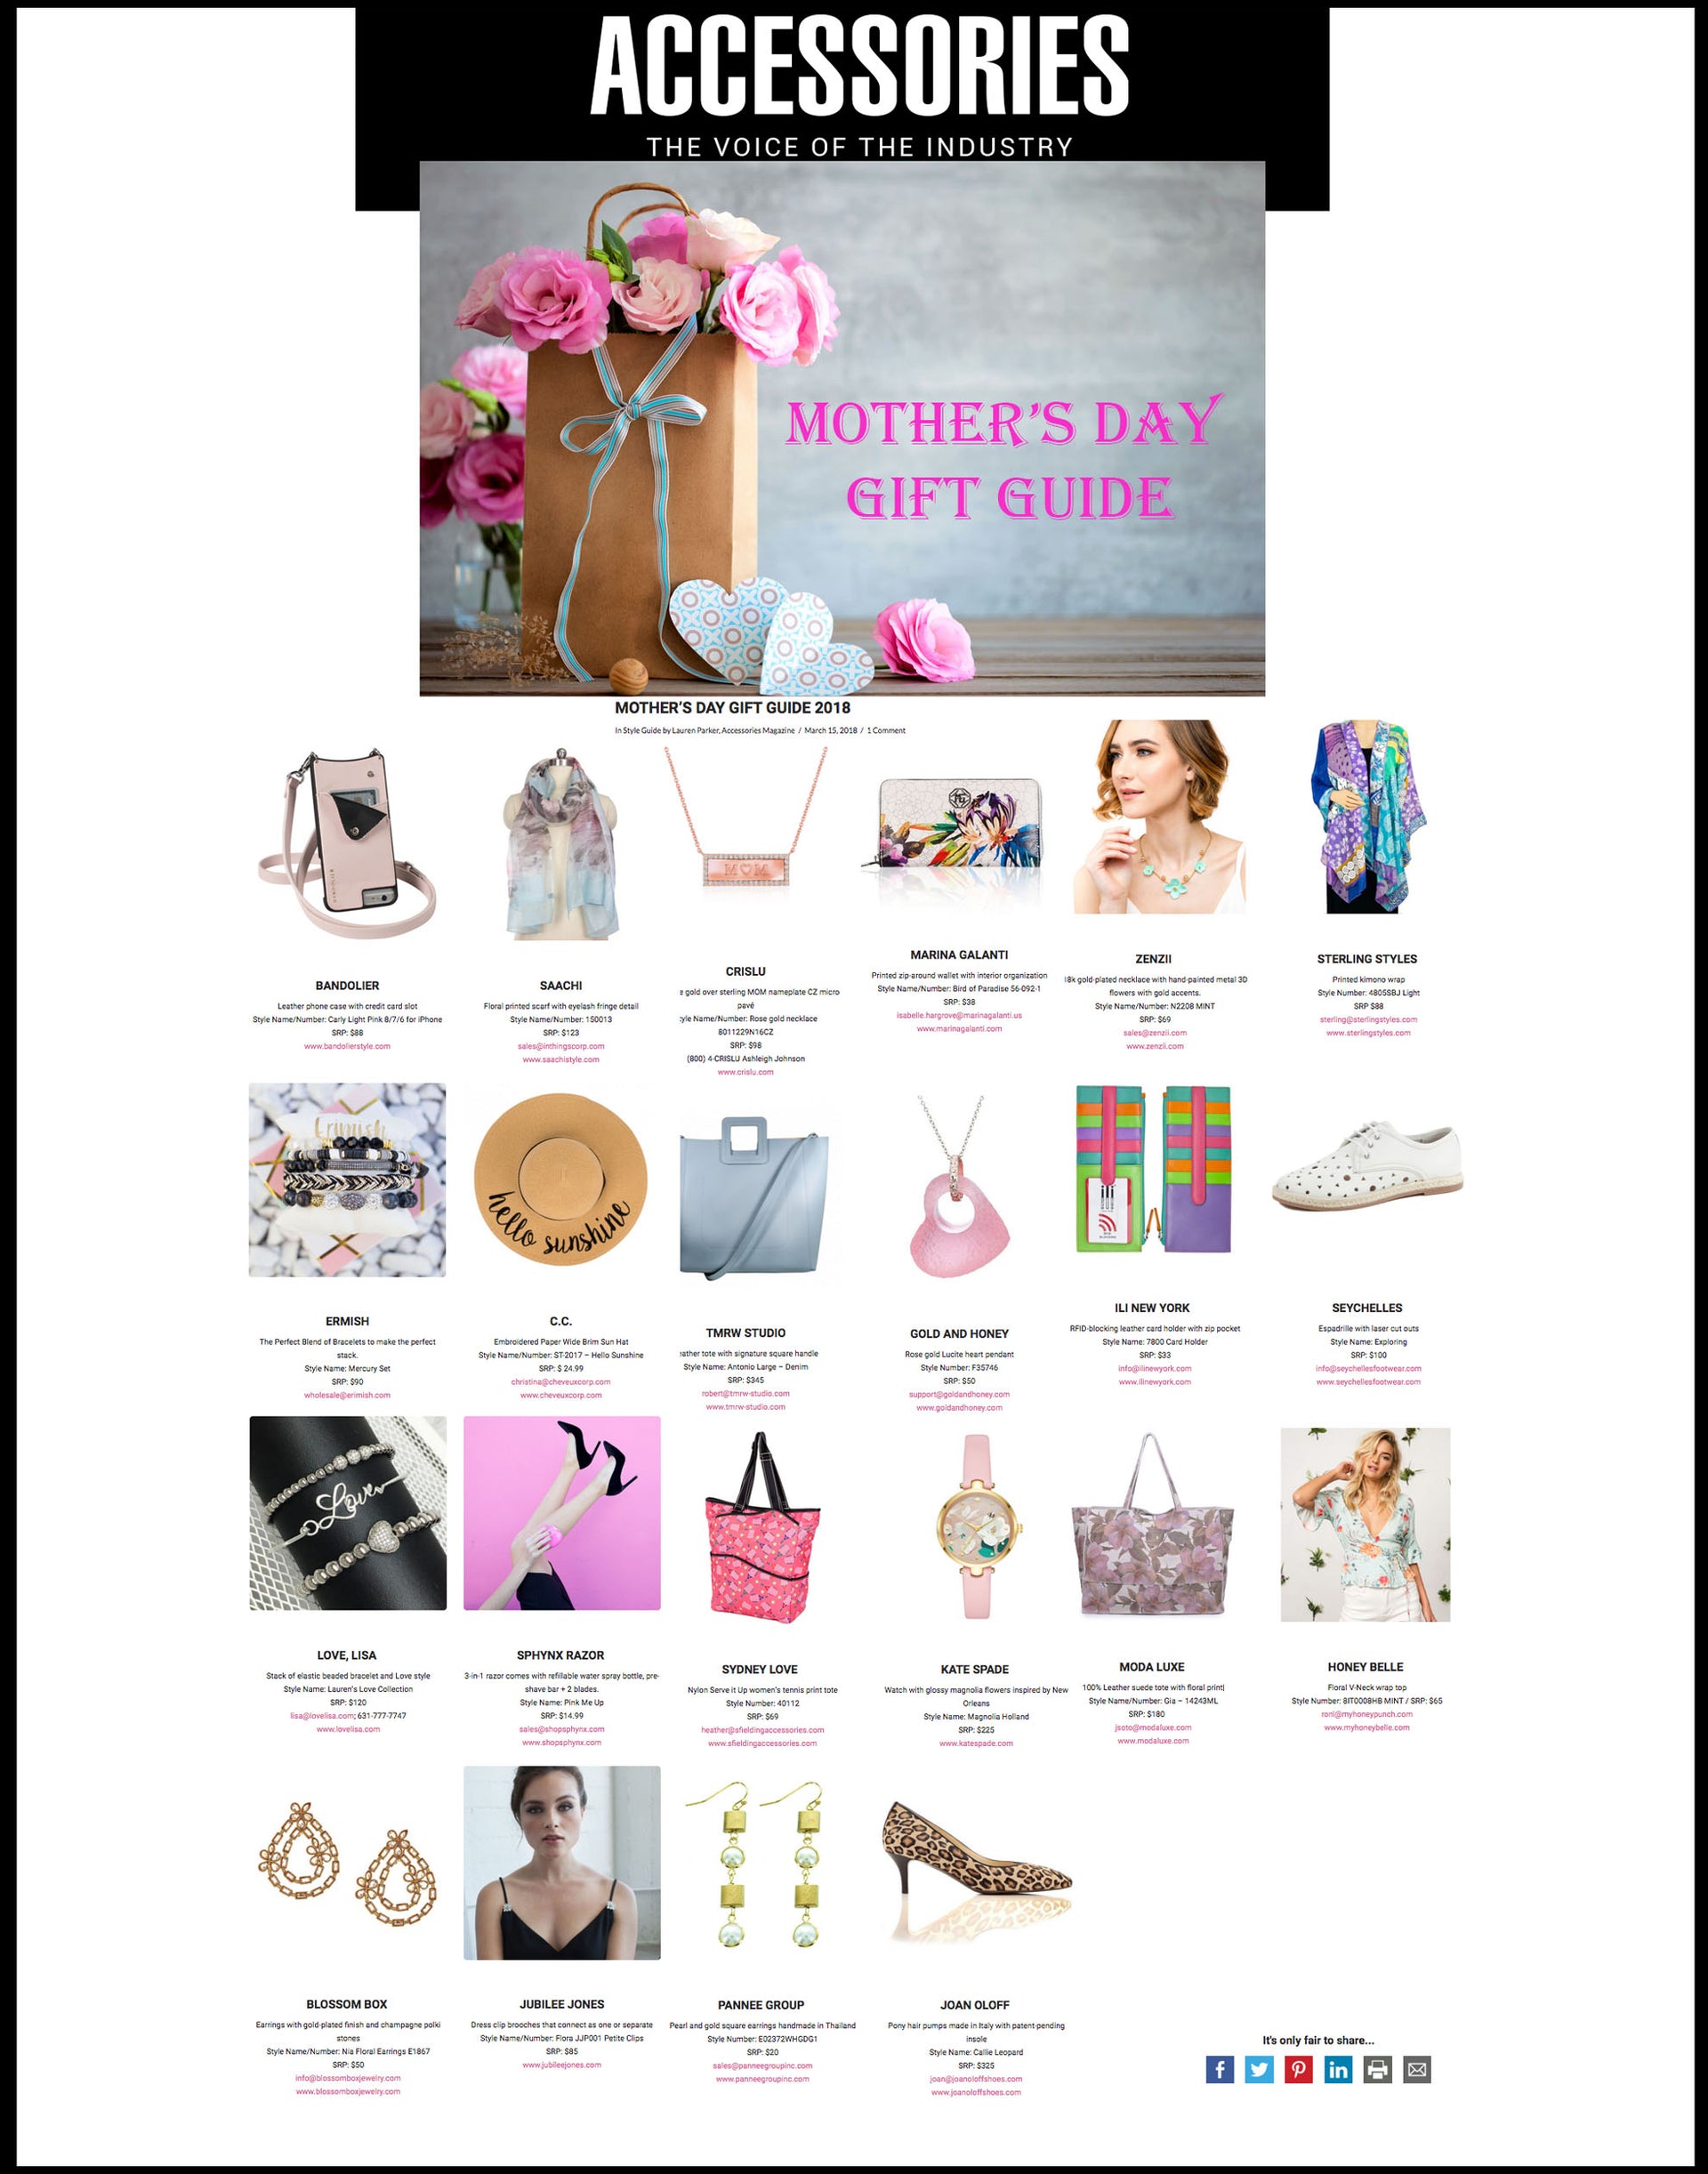 My Bracelets Made The Accessories Magazine Mother's Day Guide WOOHOO